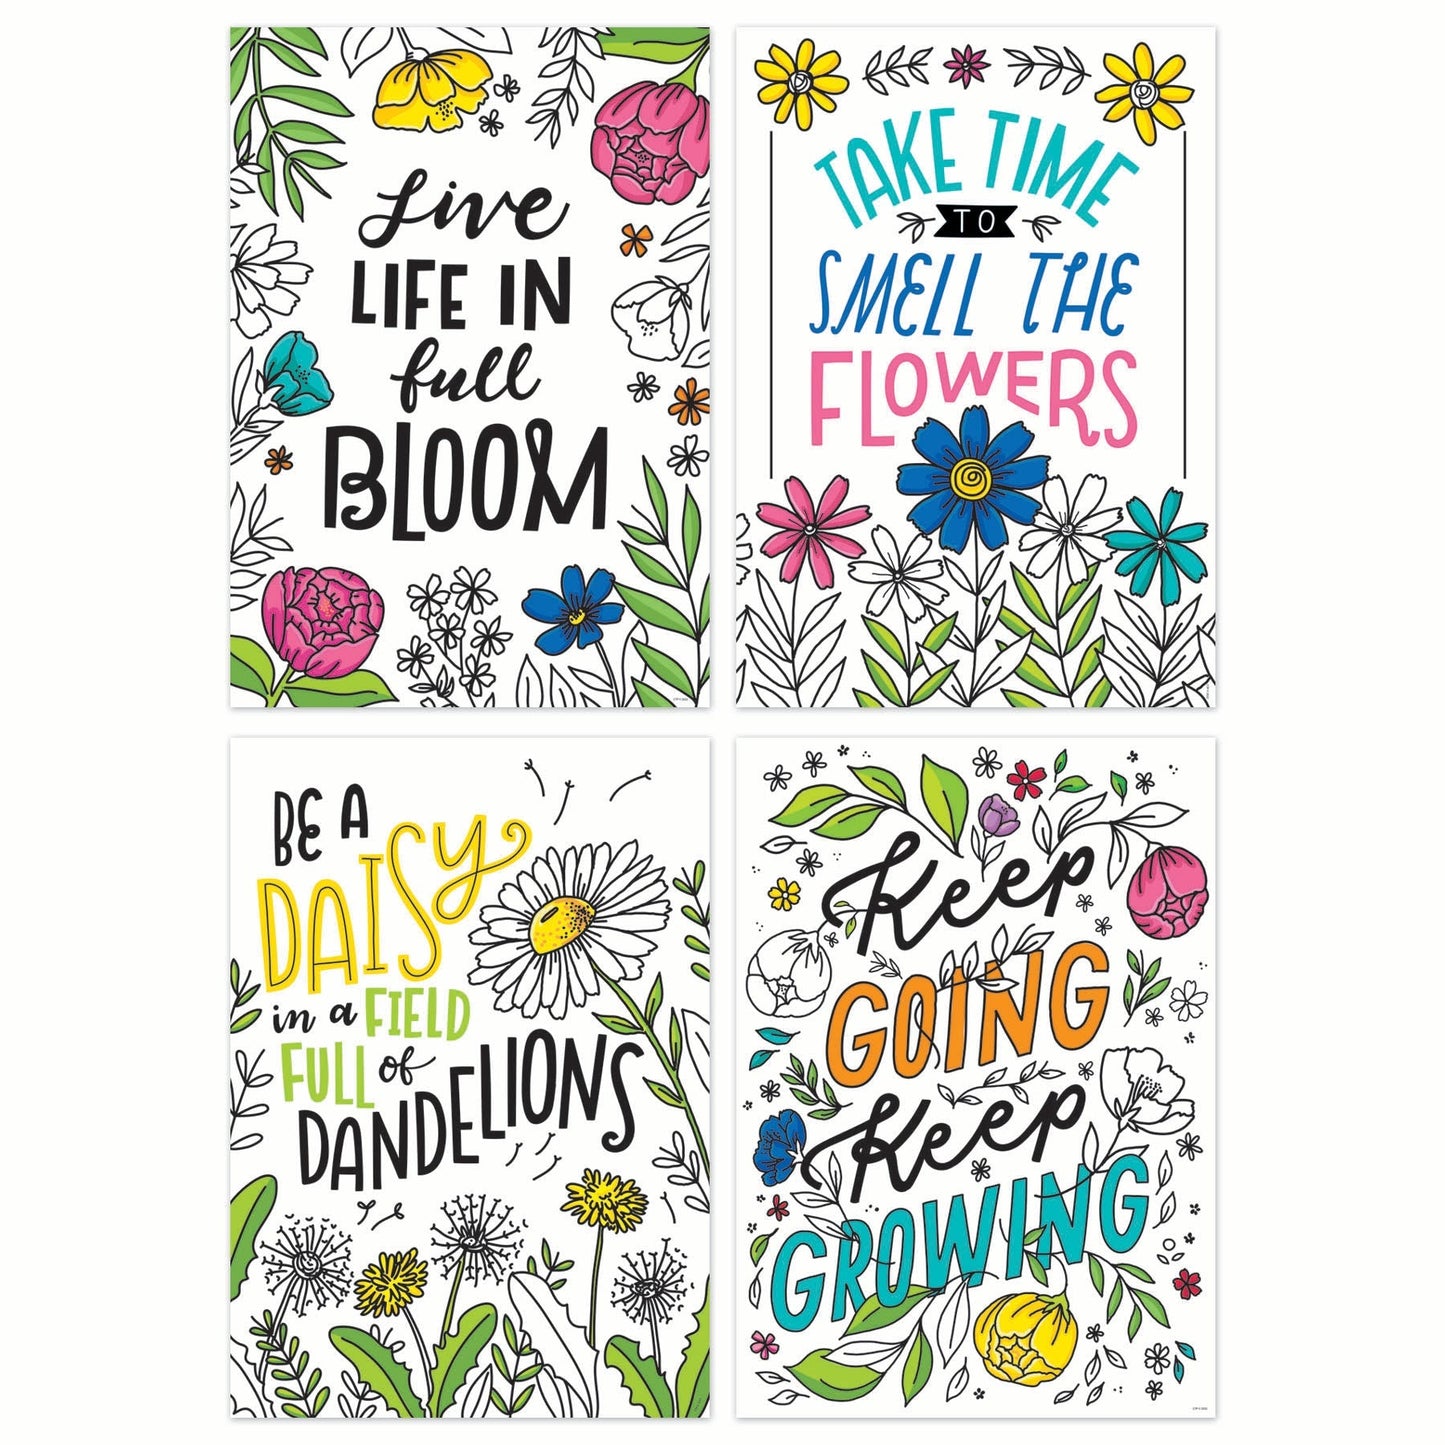 Bright Blooms Inspire U 4-Poster Pack (Bright Blooms)